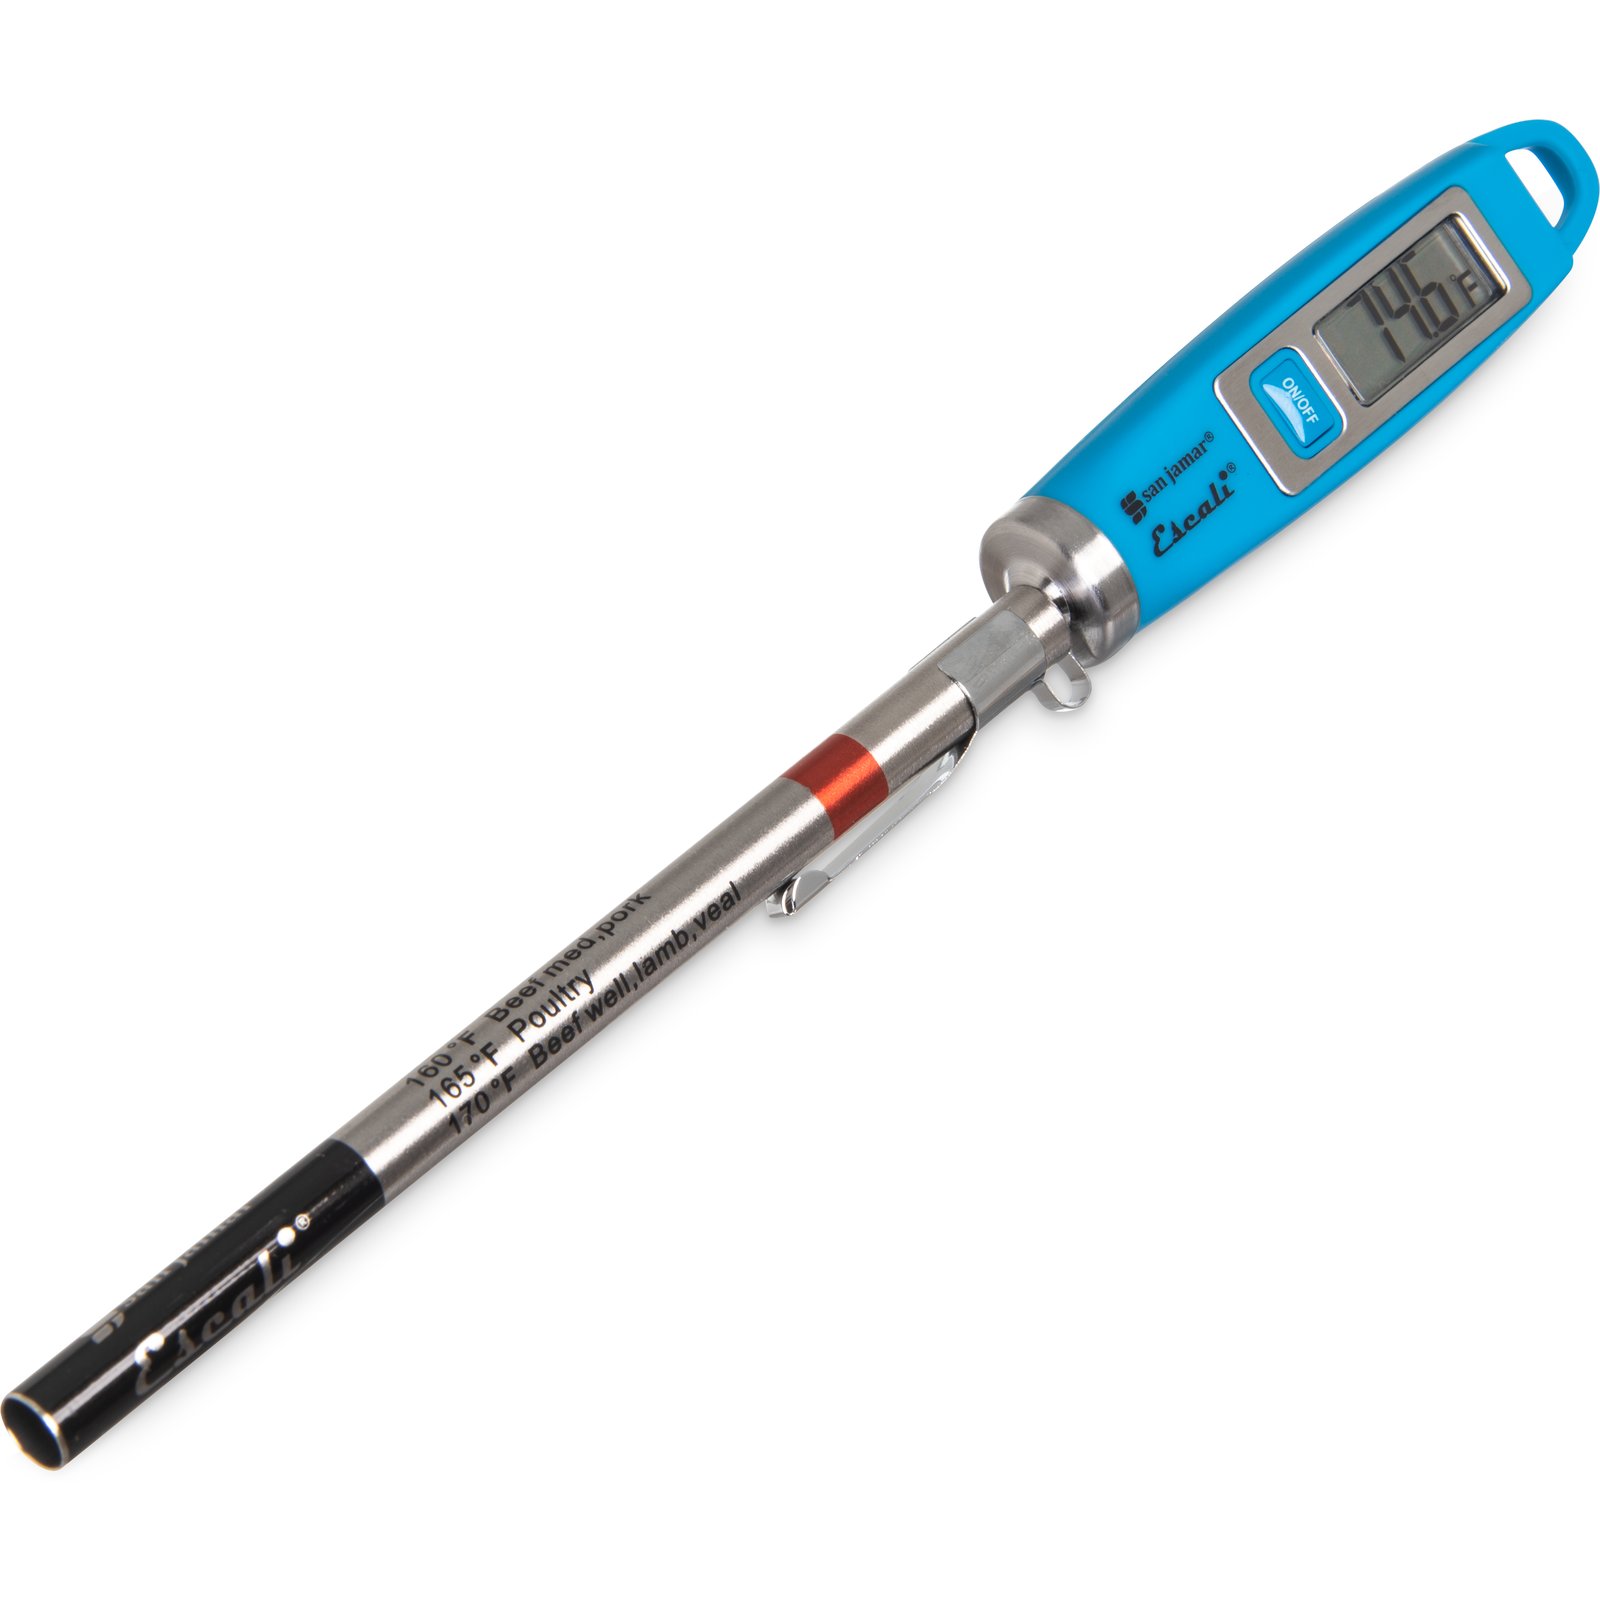 THDGBL - Gourmet Digital Thermometer Blue Nsf Listed - Blue